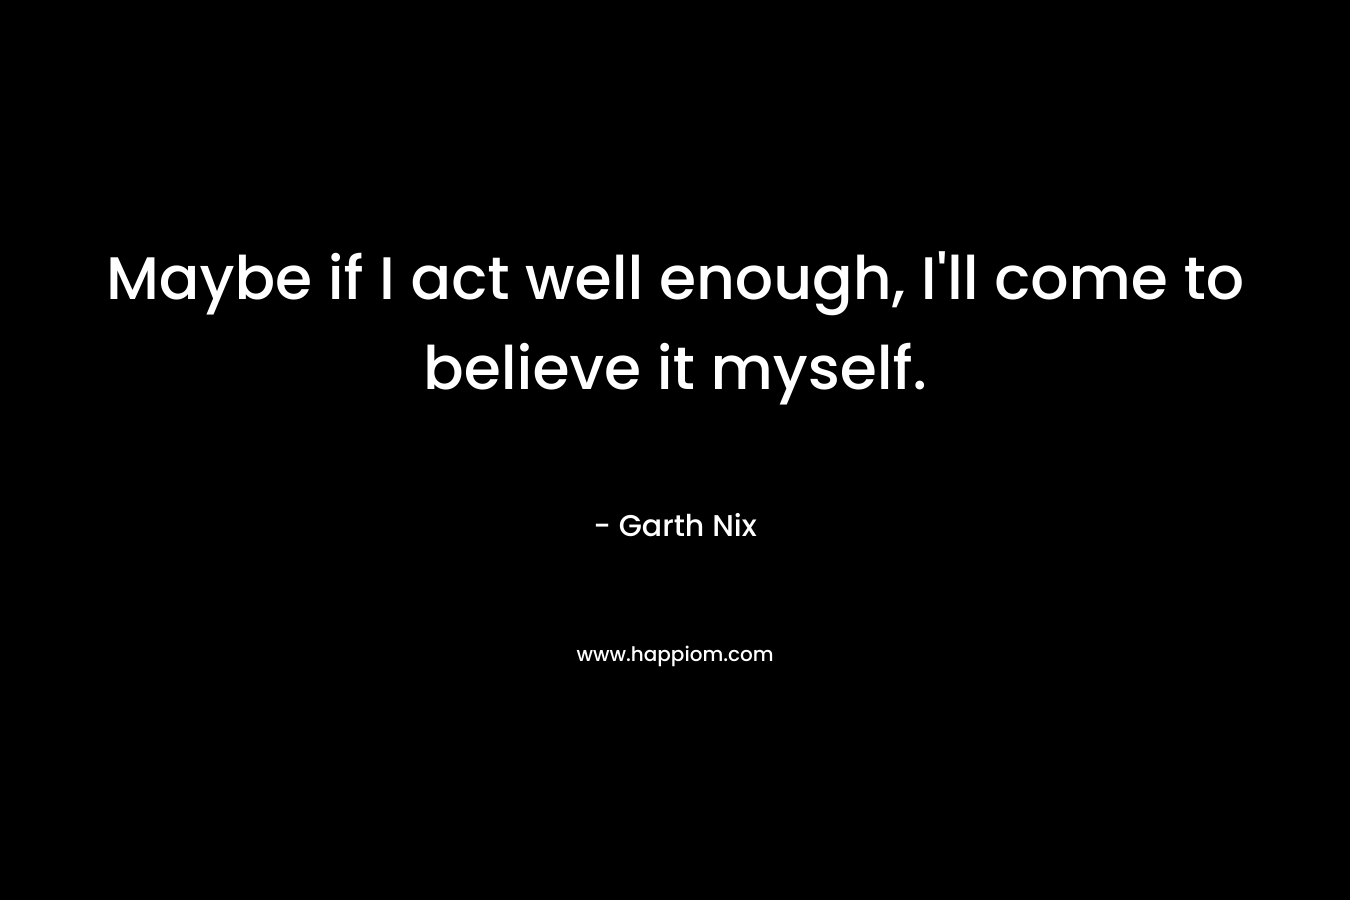 Maybe if I act well enough, I’ll come to believe it myself. – Garth Nix